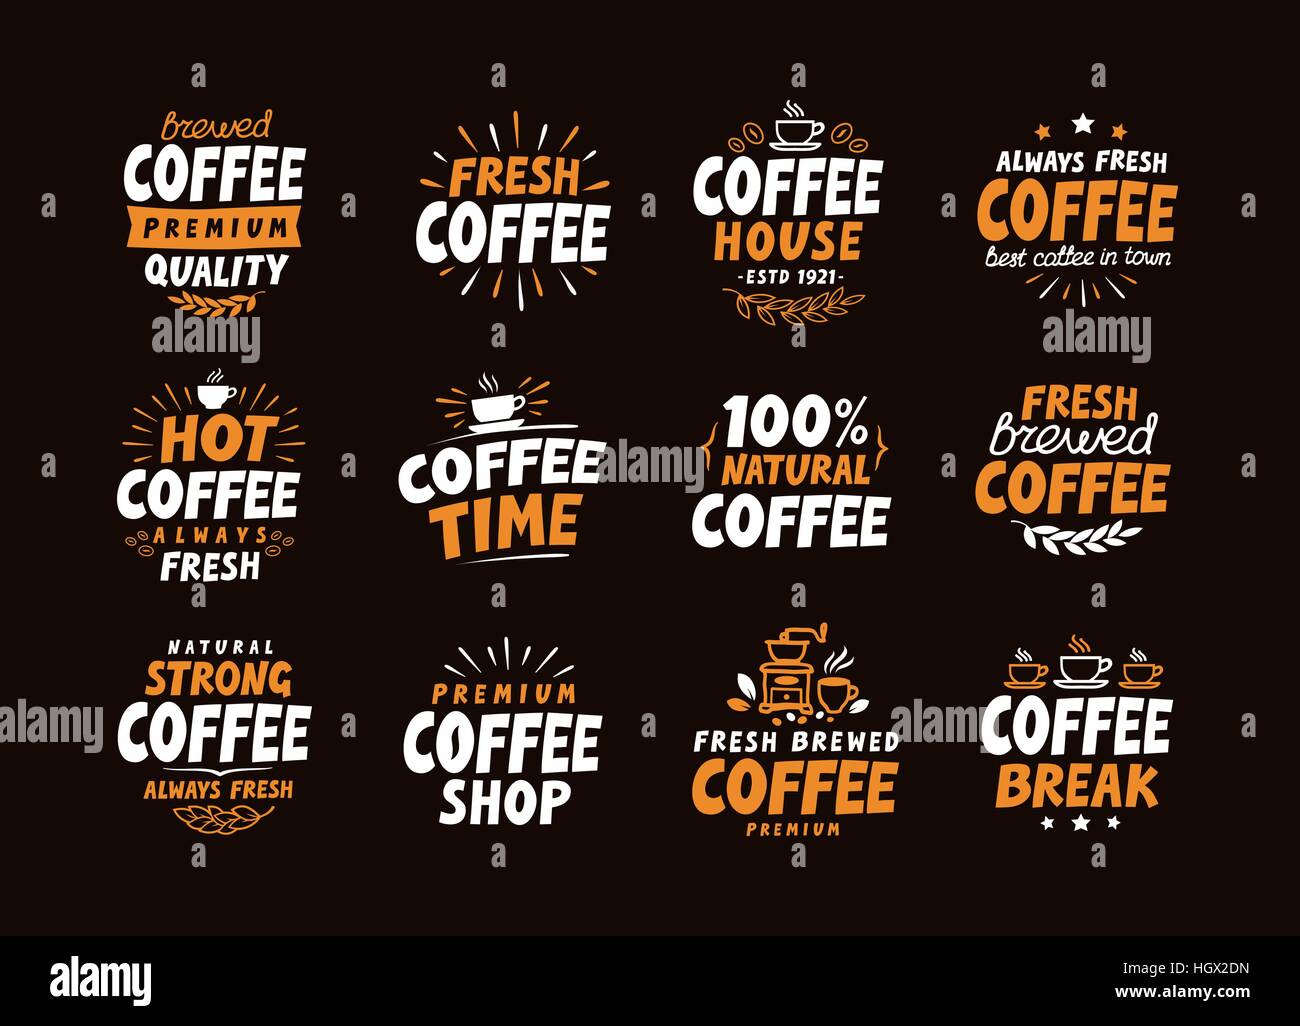 Coffee logo. Collection elements for menu design restaurant or cafe Stock Vector